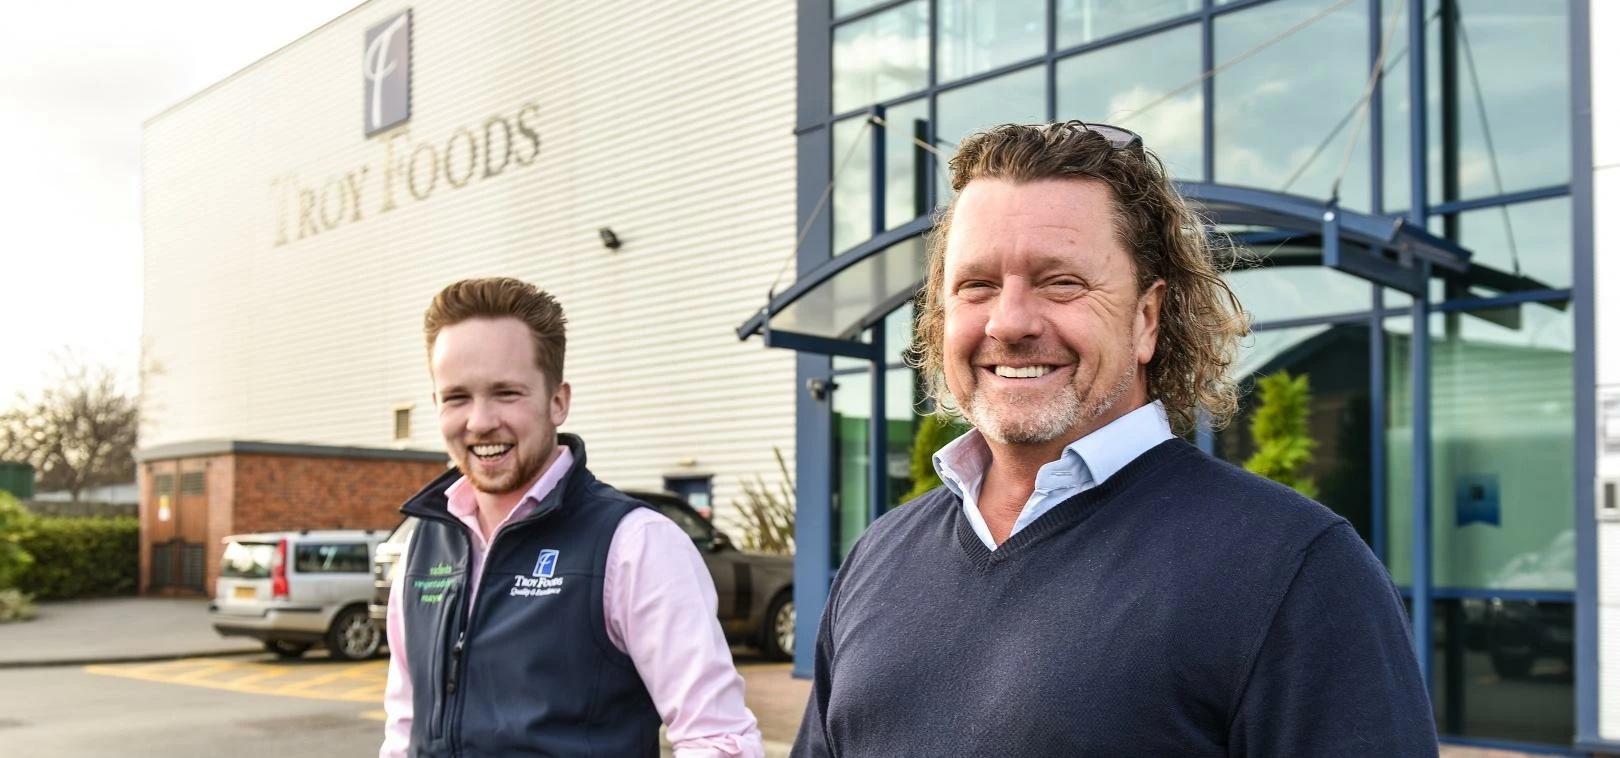 David Kempley (foreground), CEO and owner of Troy Foods, with his son, James, general manager